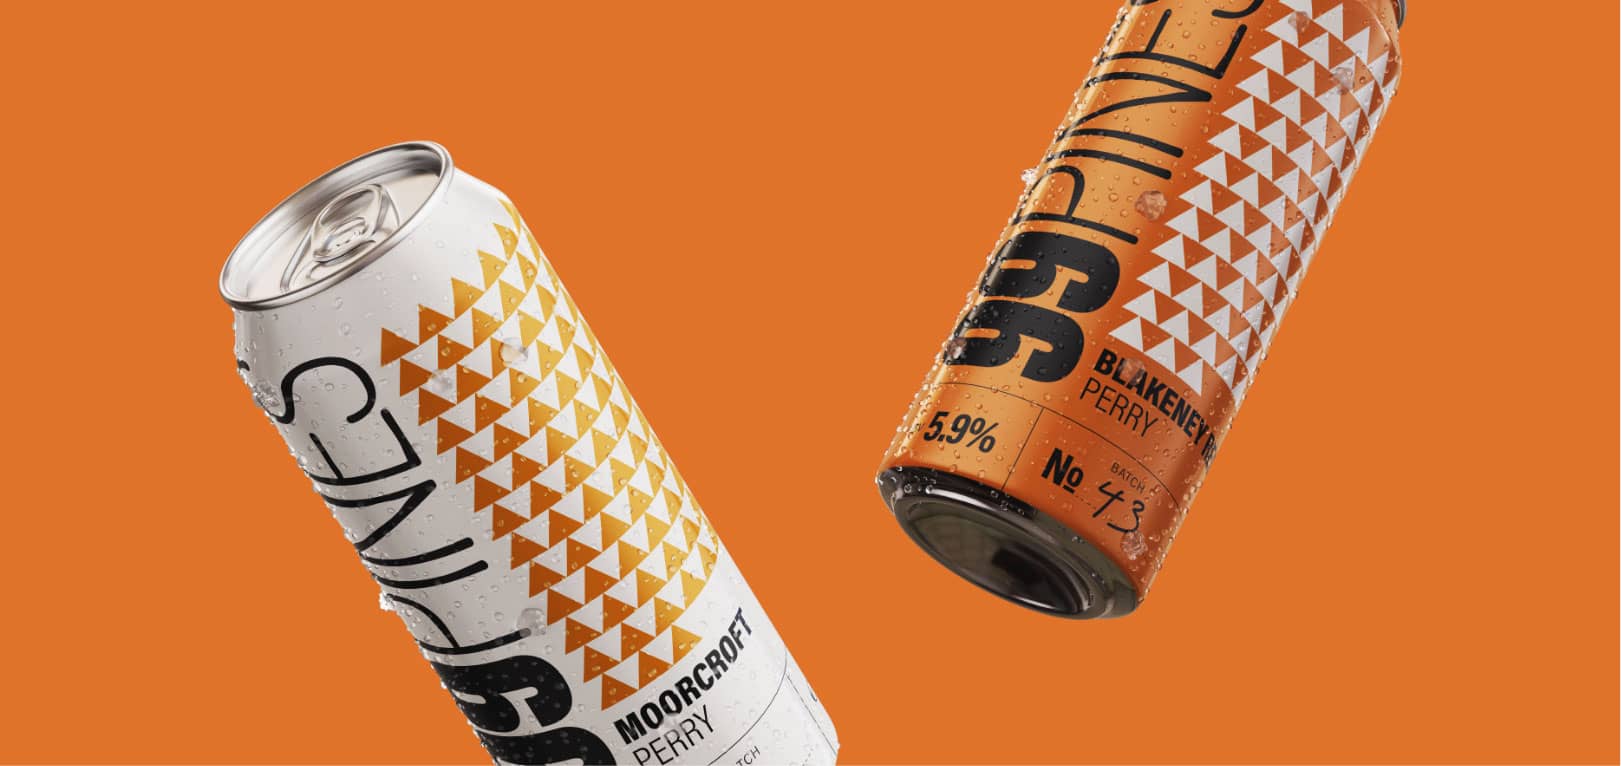 99pines' design case study cans mockup